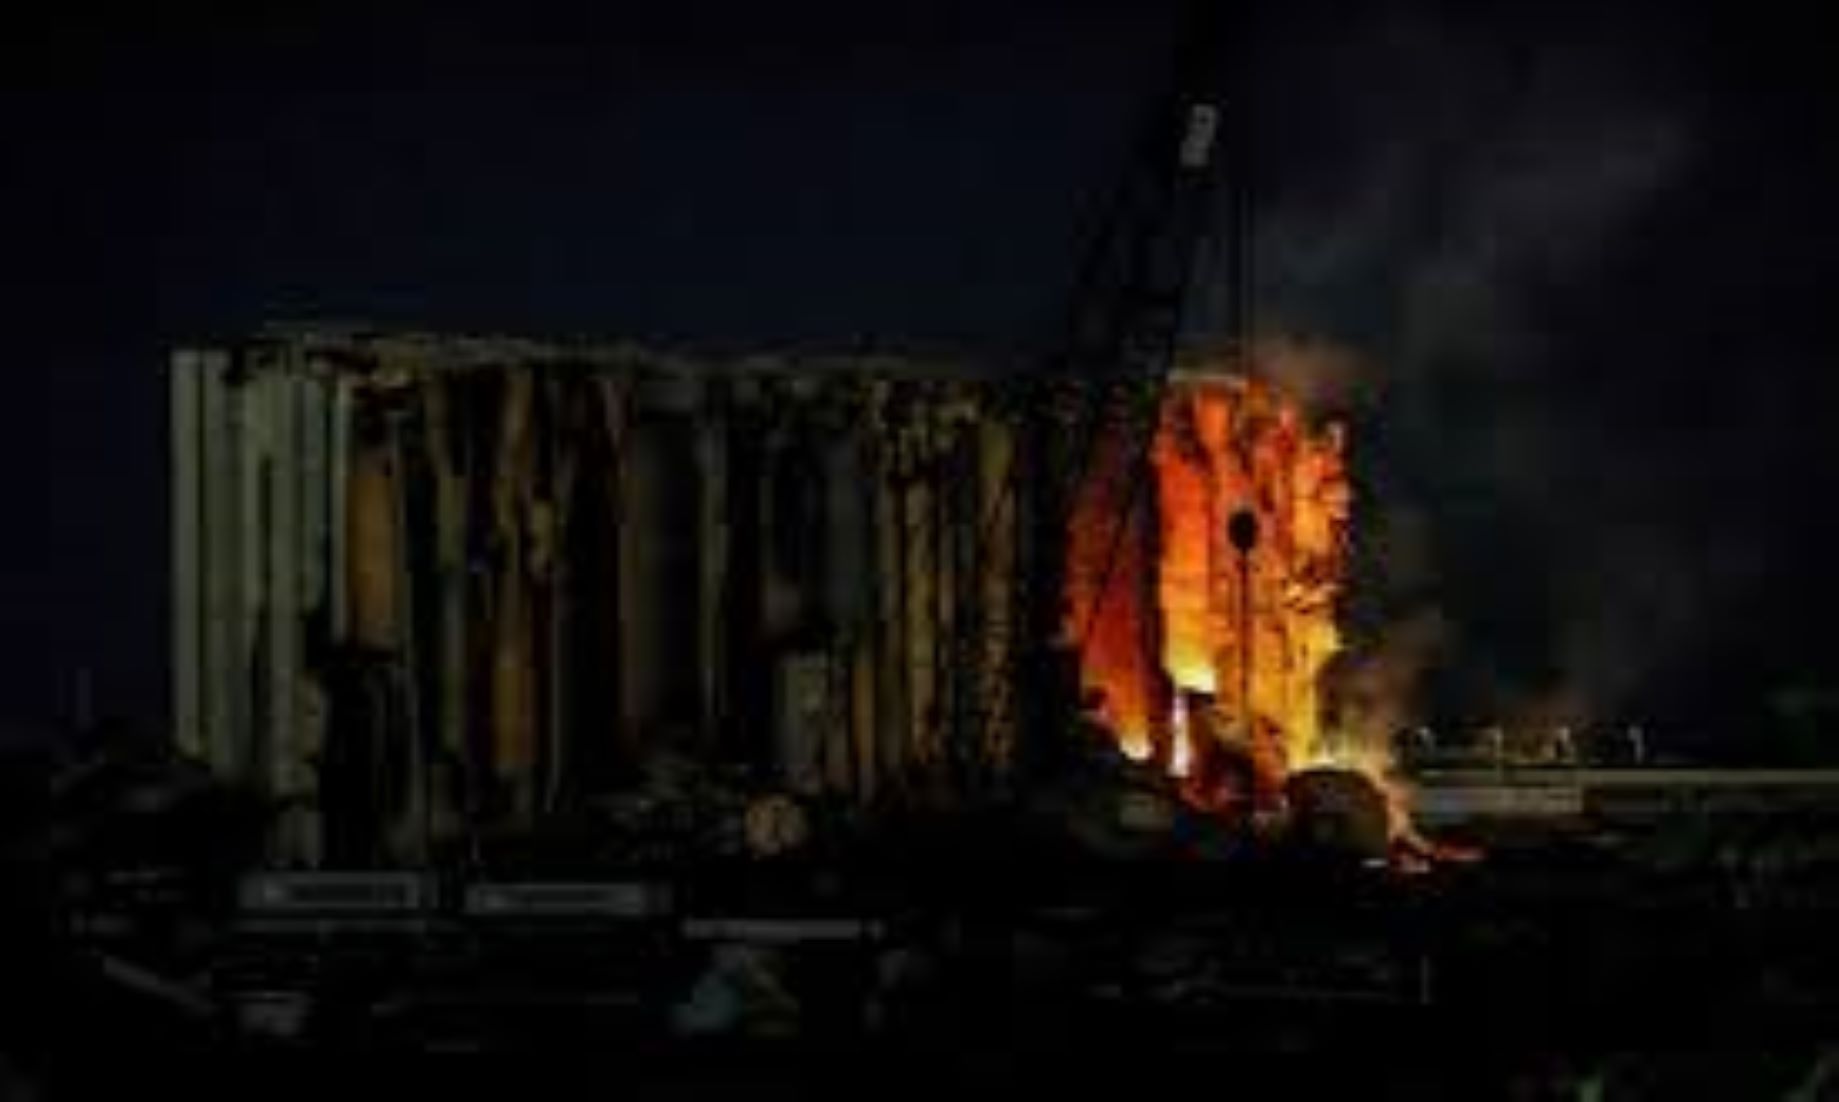 Part Of Beirut Port Silos Collapsed After Weeks Of Fire